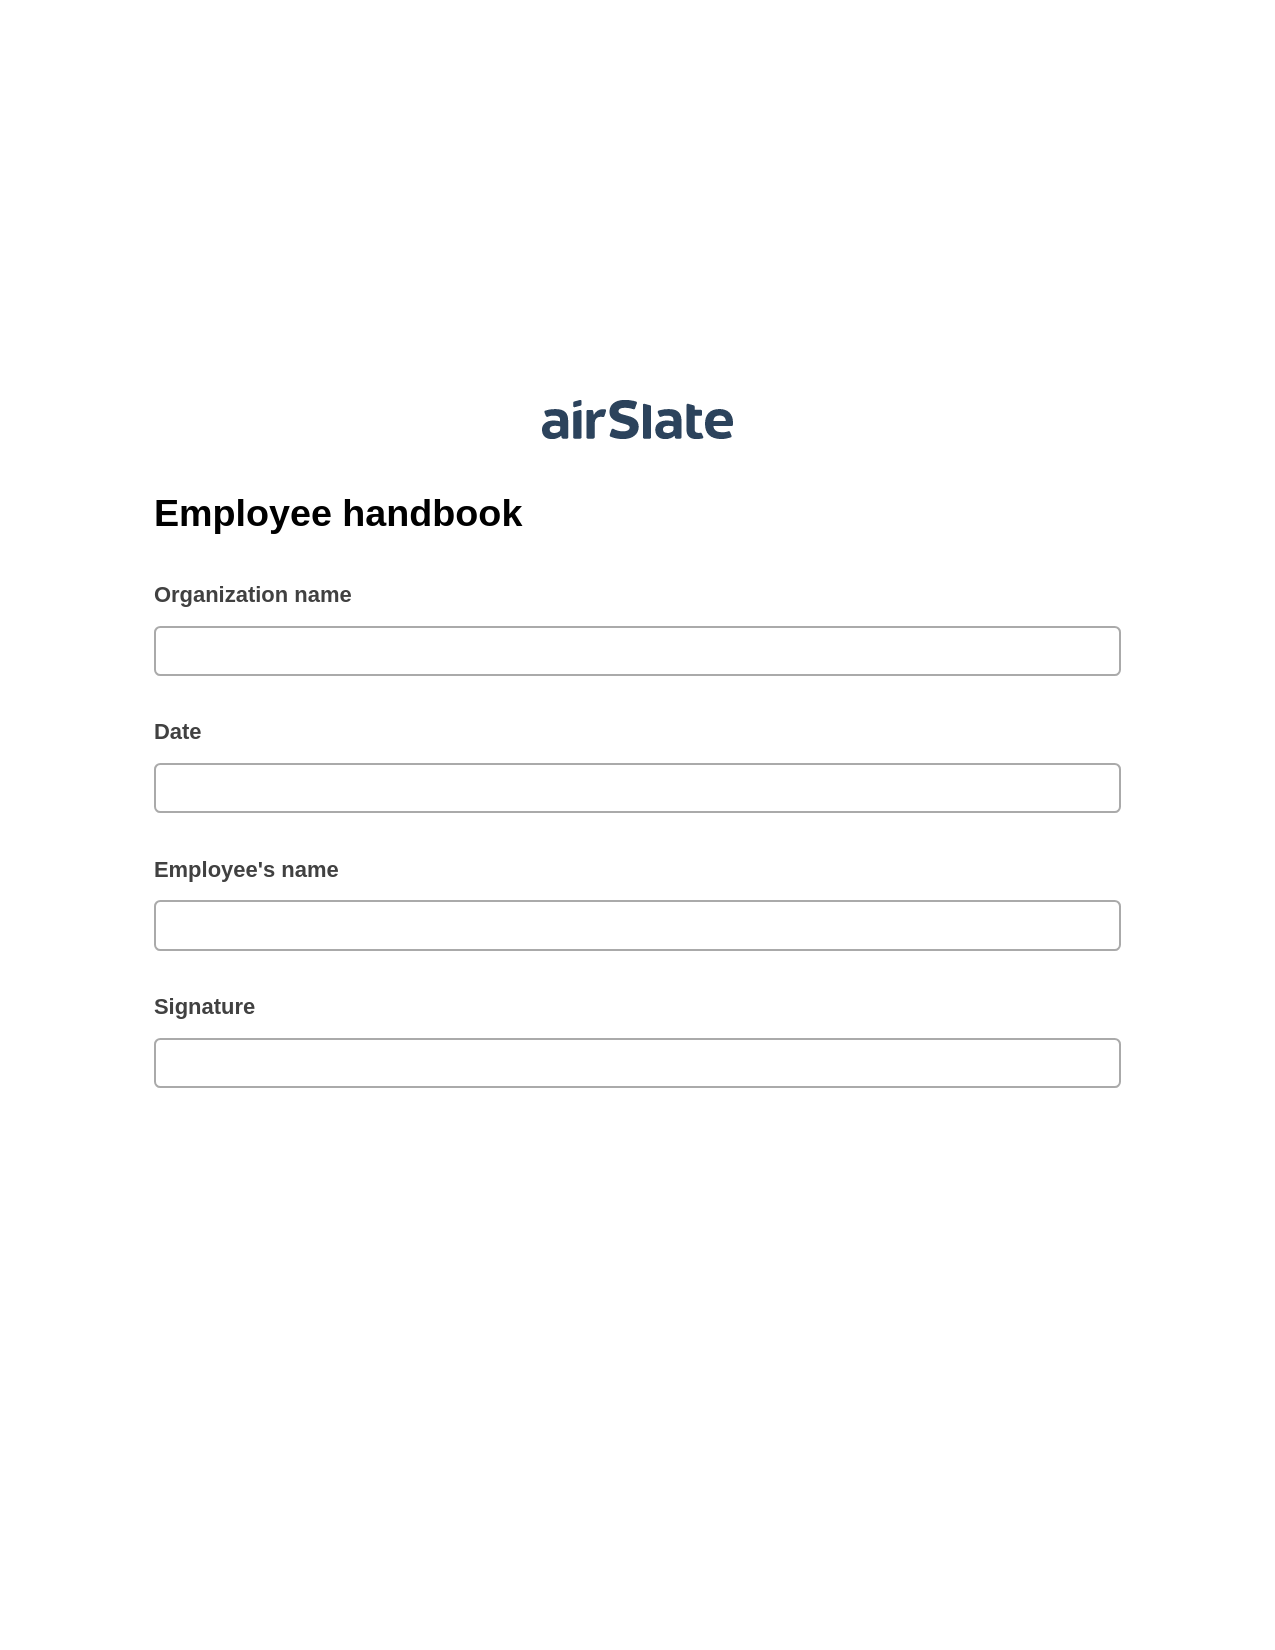 Employee handbook Pre-fill from Salesforce Records with SOQL Bot, Audit Trail Bot, Export to Salesforce Bot